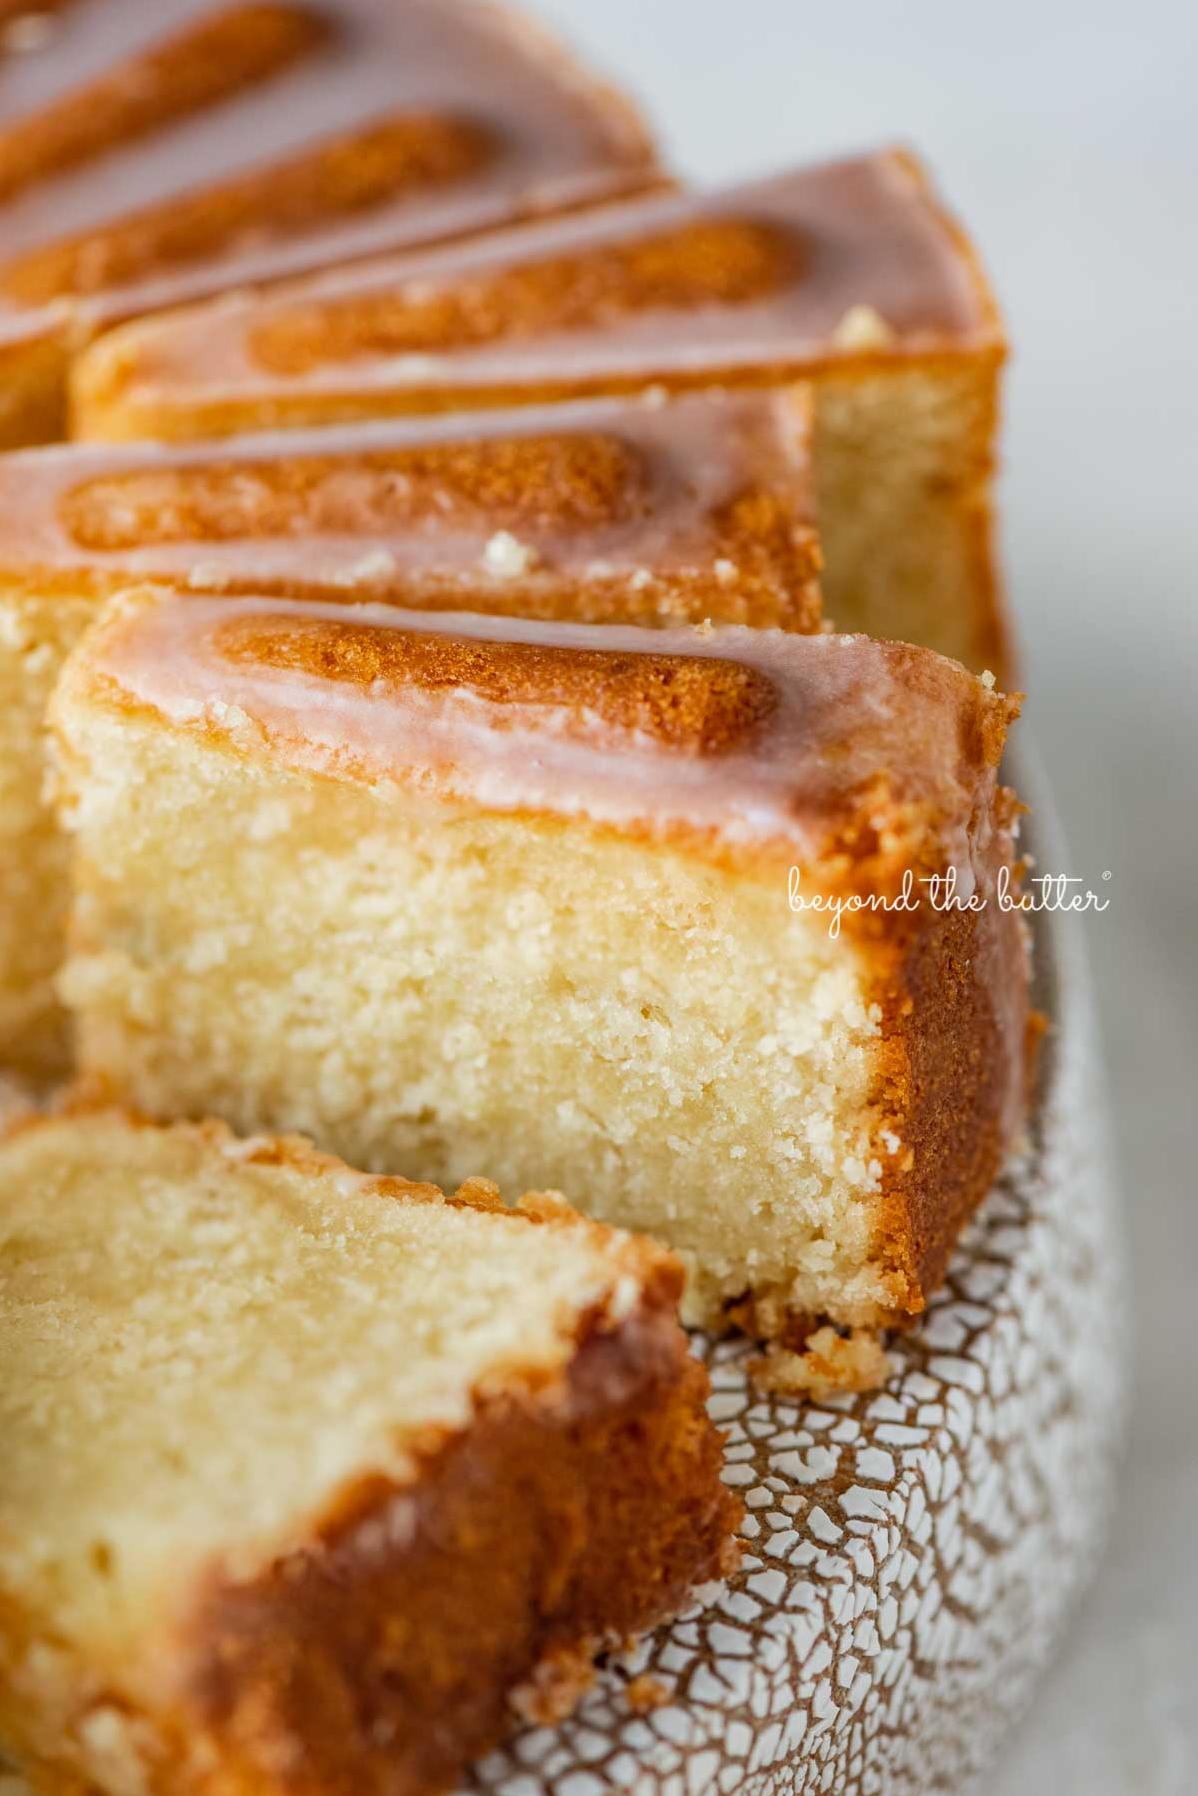  The perfect pound cake for a sunny day!